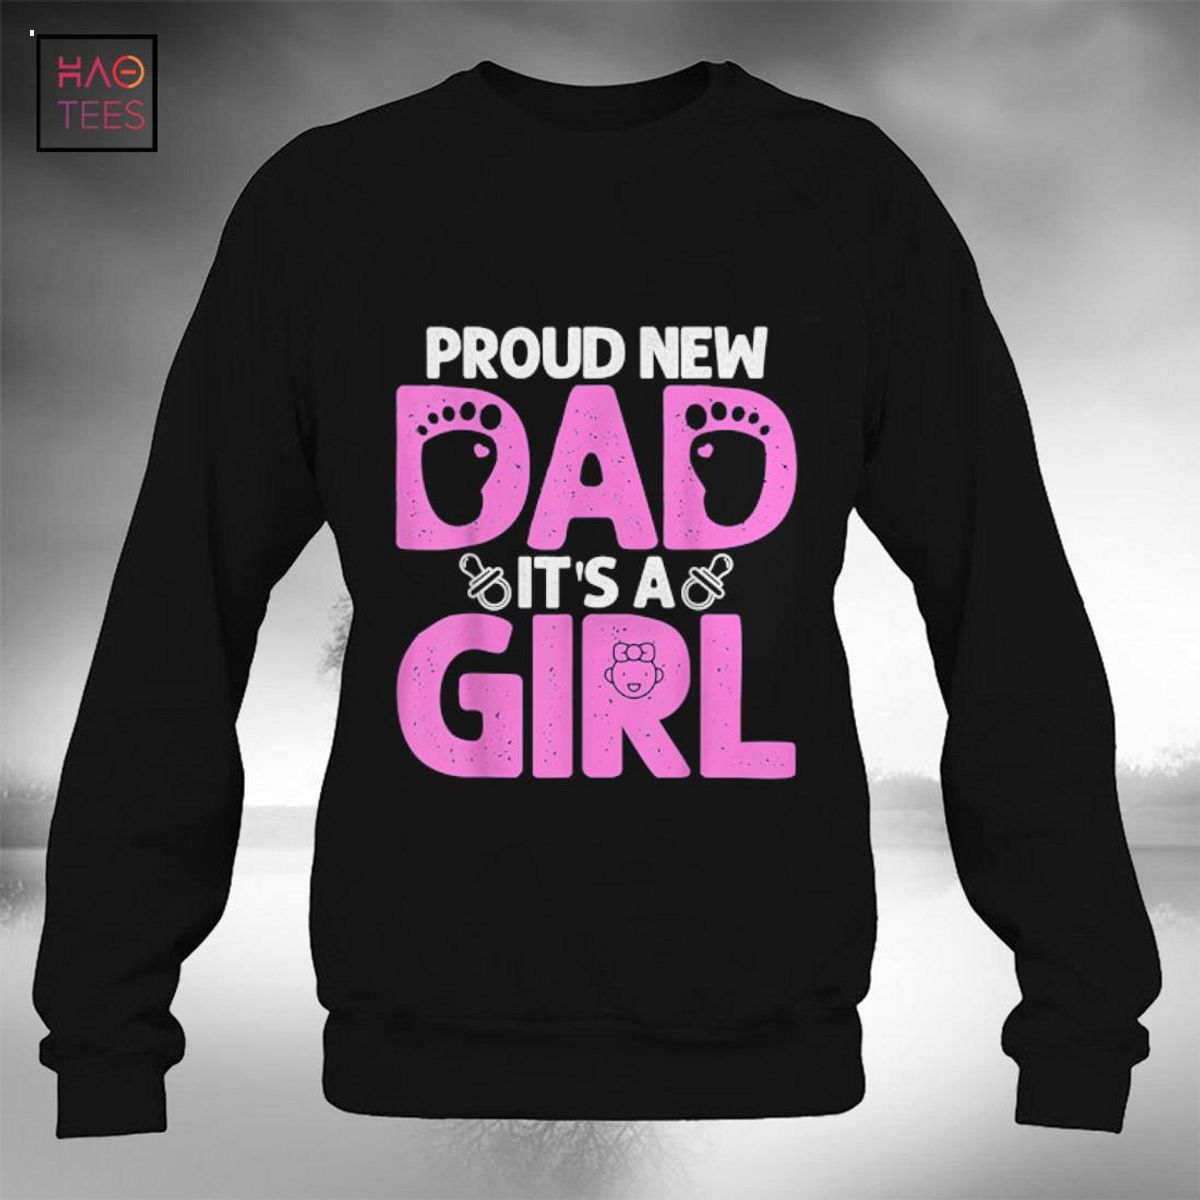 Fathers Day Gift Funny Dad Shirts Girl Dad Shirt Dad of 